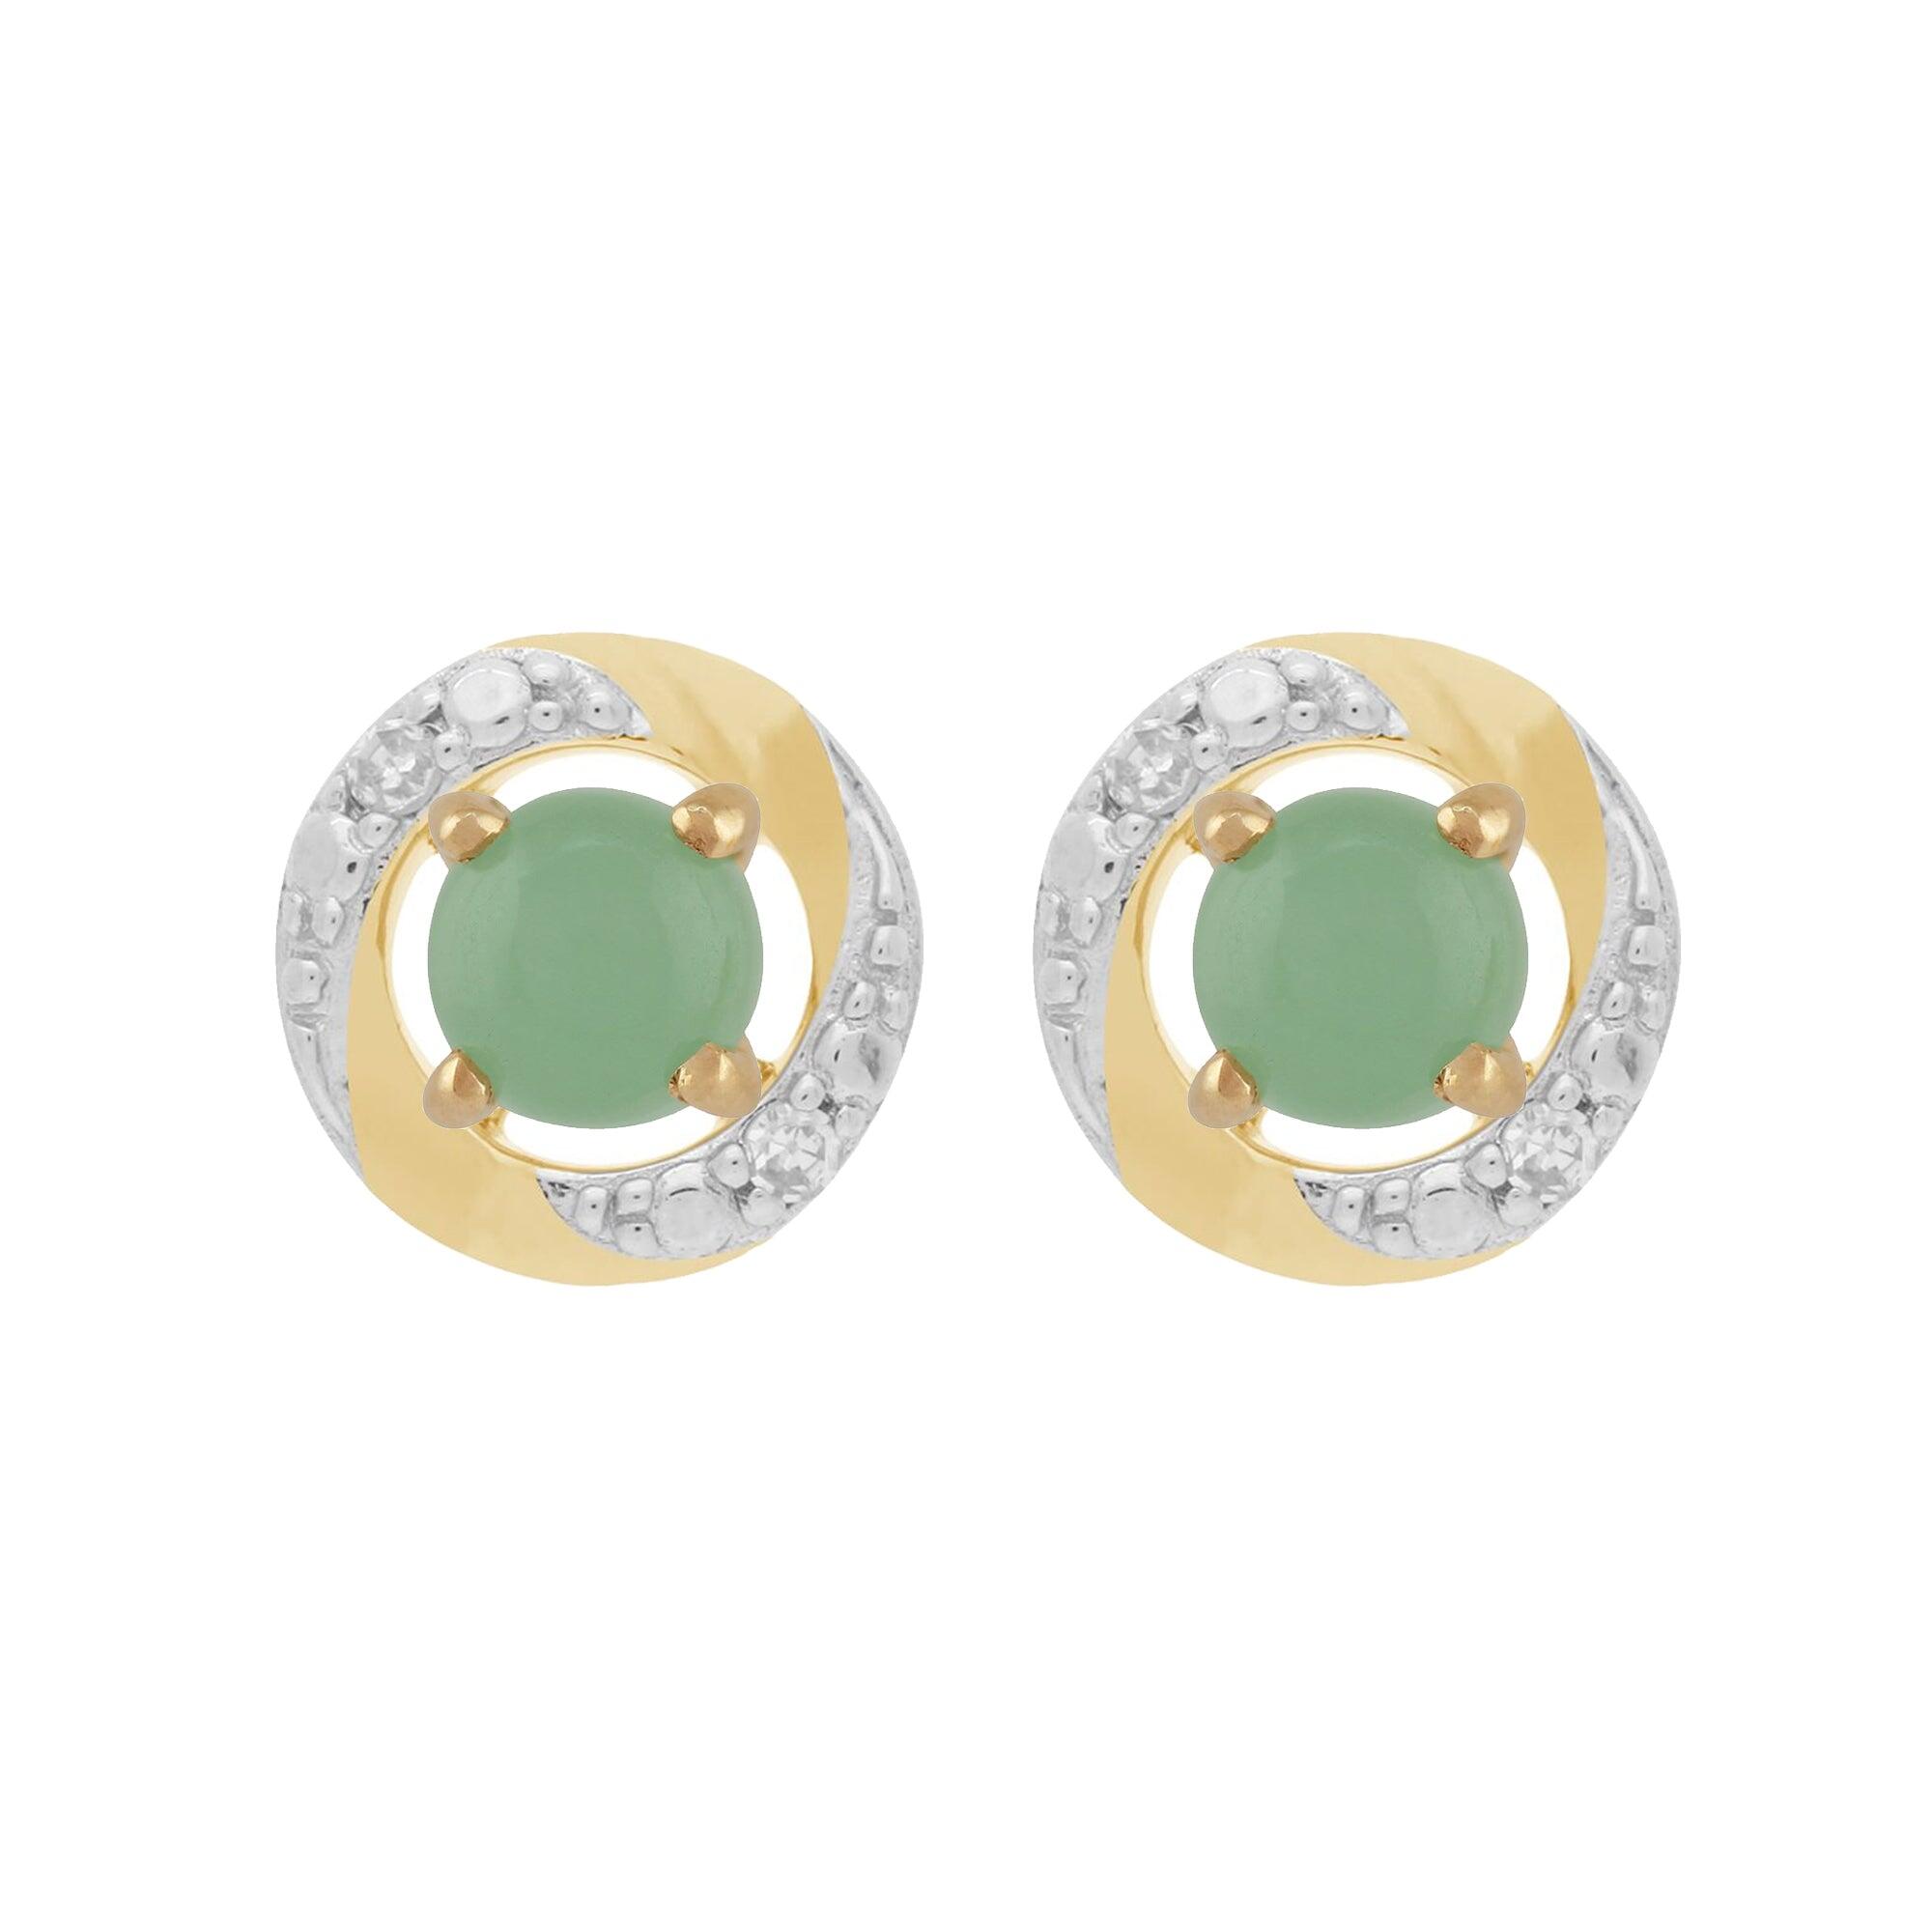 Classic Round Jade Studs with Detachable Diamond Halo Ear Jacket in 9ct Yellow Gold